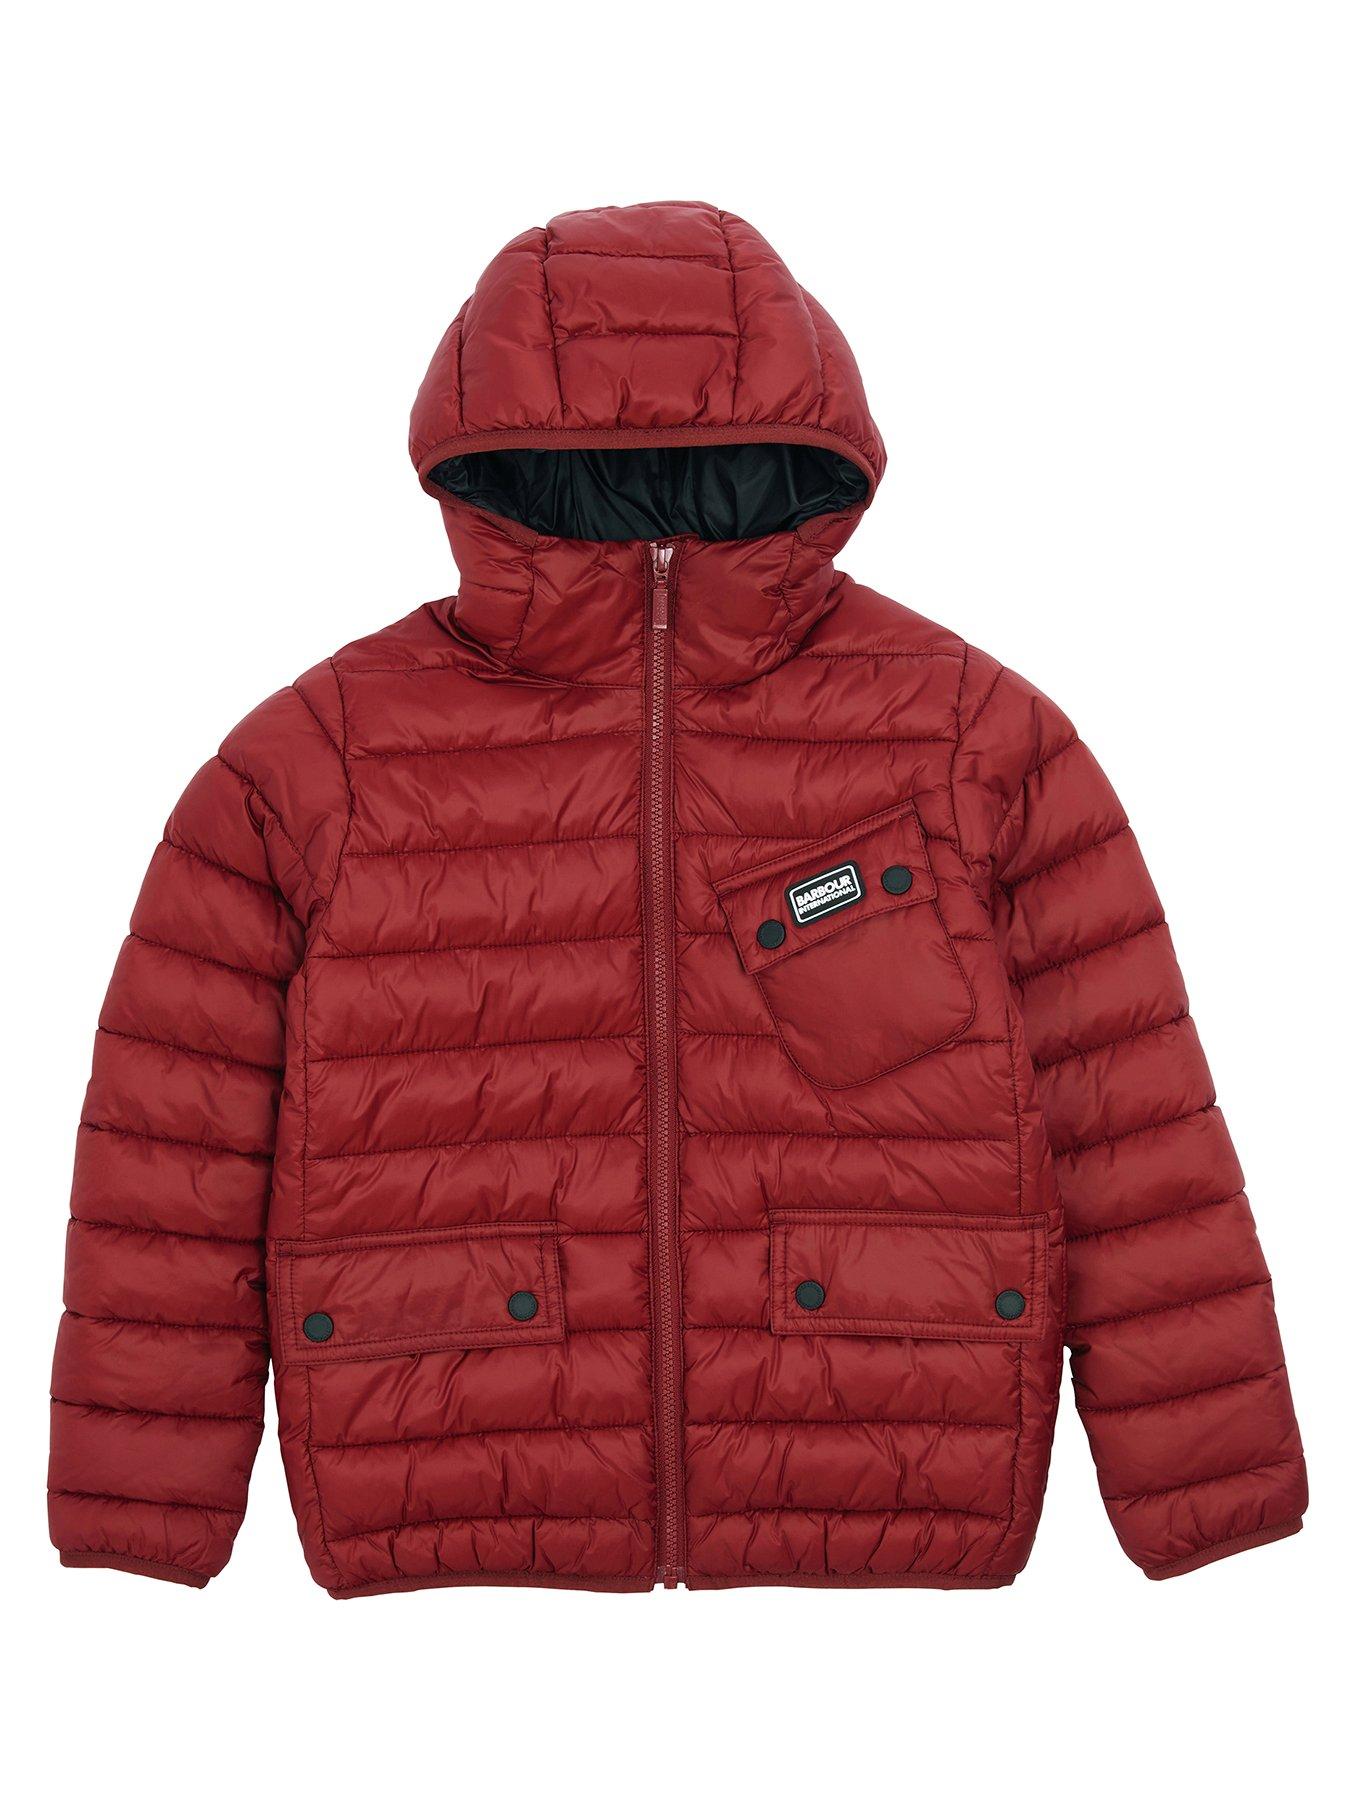 Packable Jacket 9-10 Yrs Bright Red DRY KIDS 